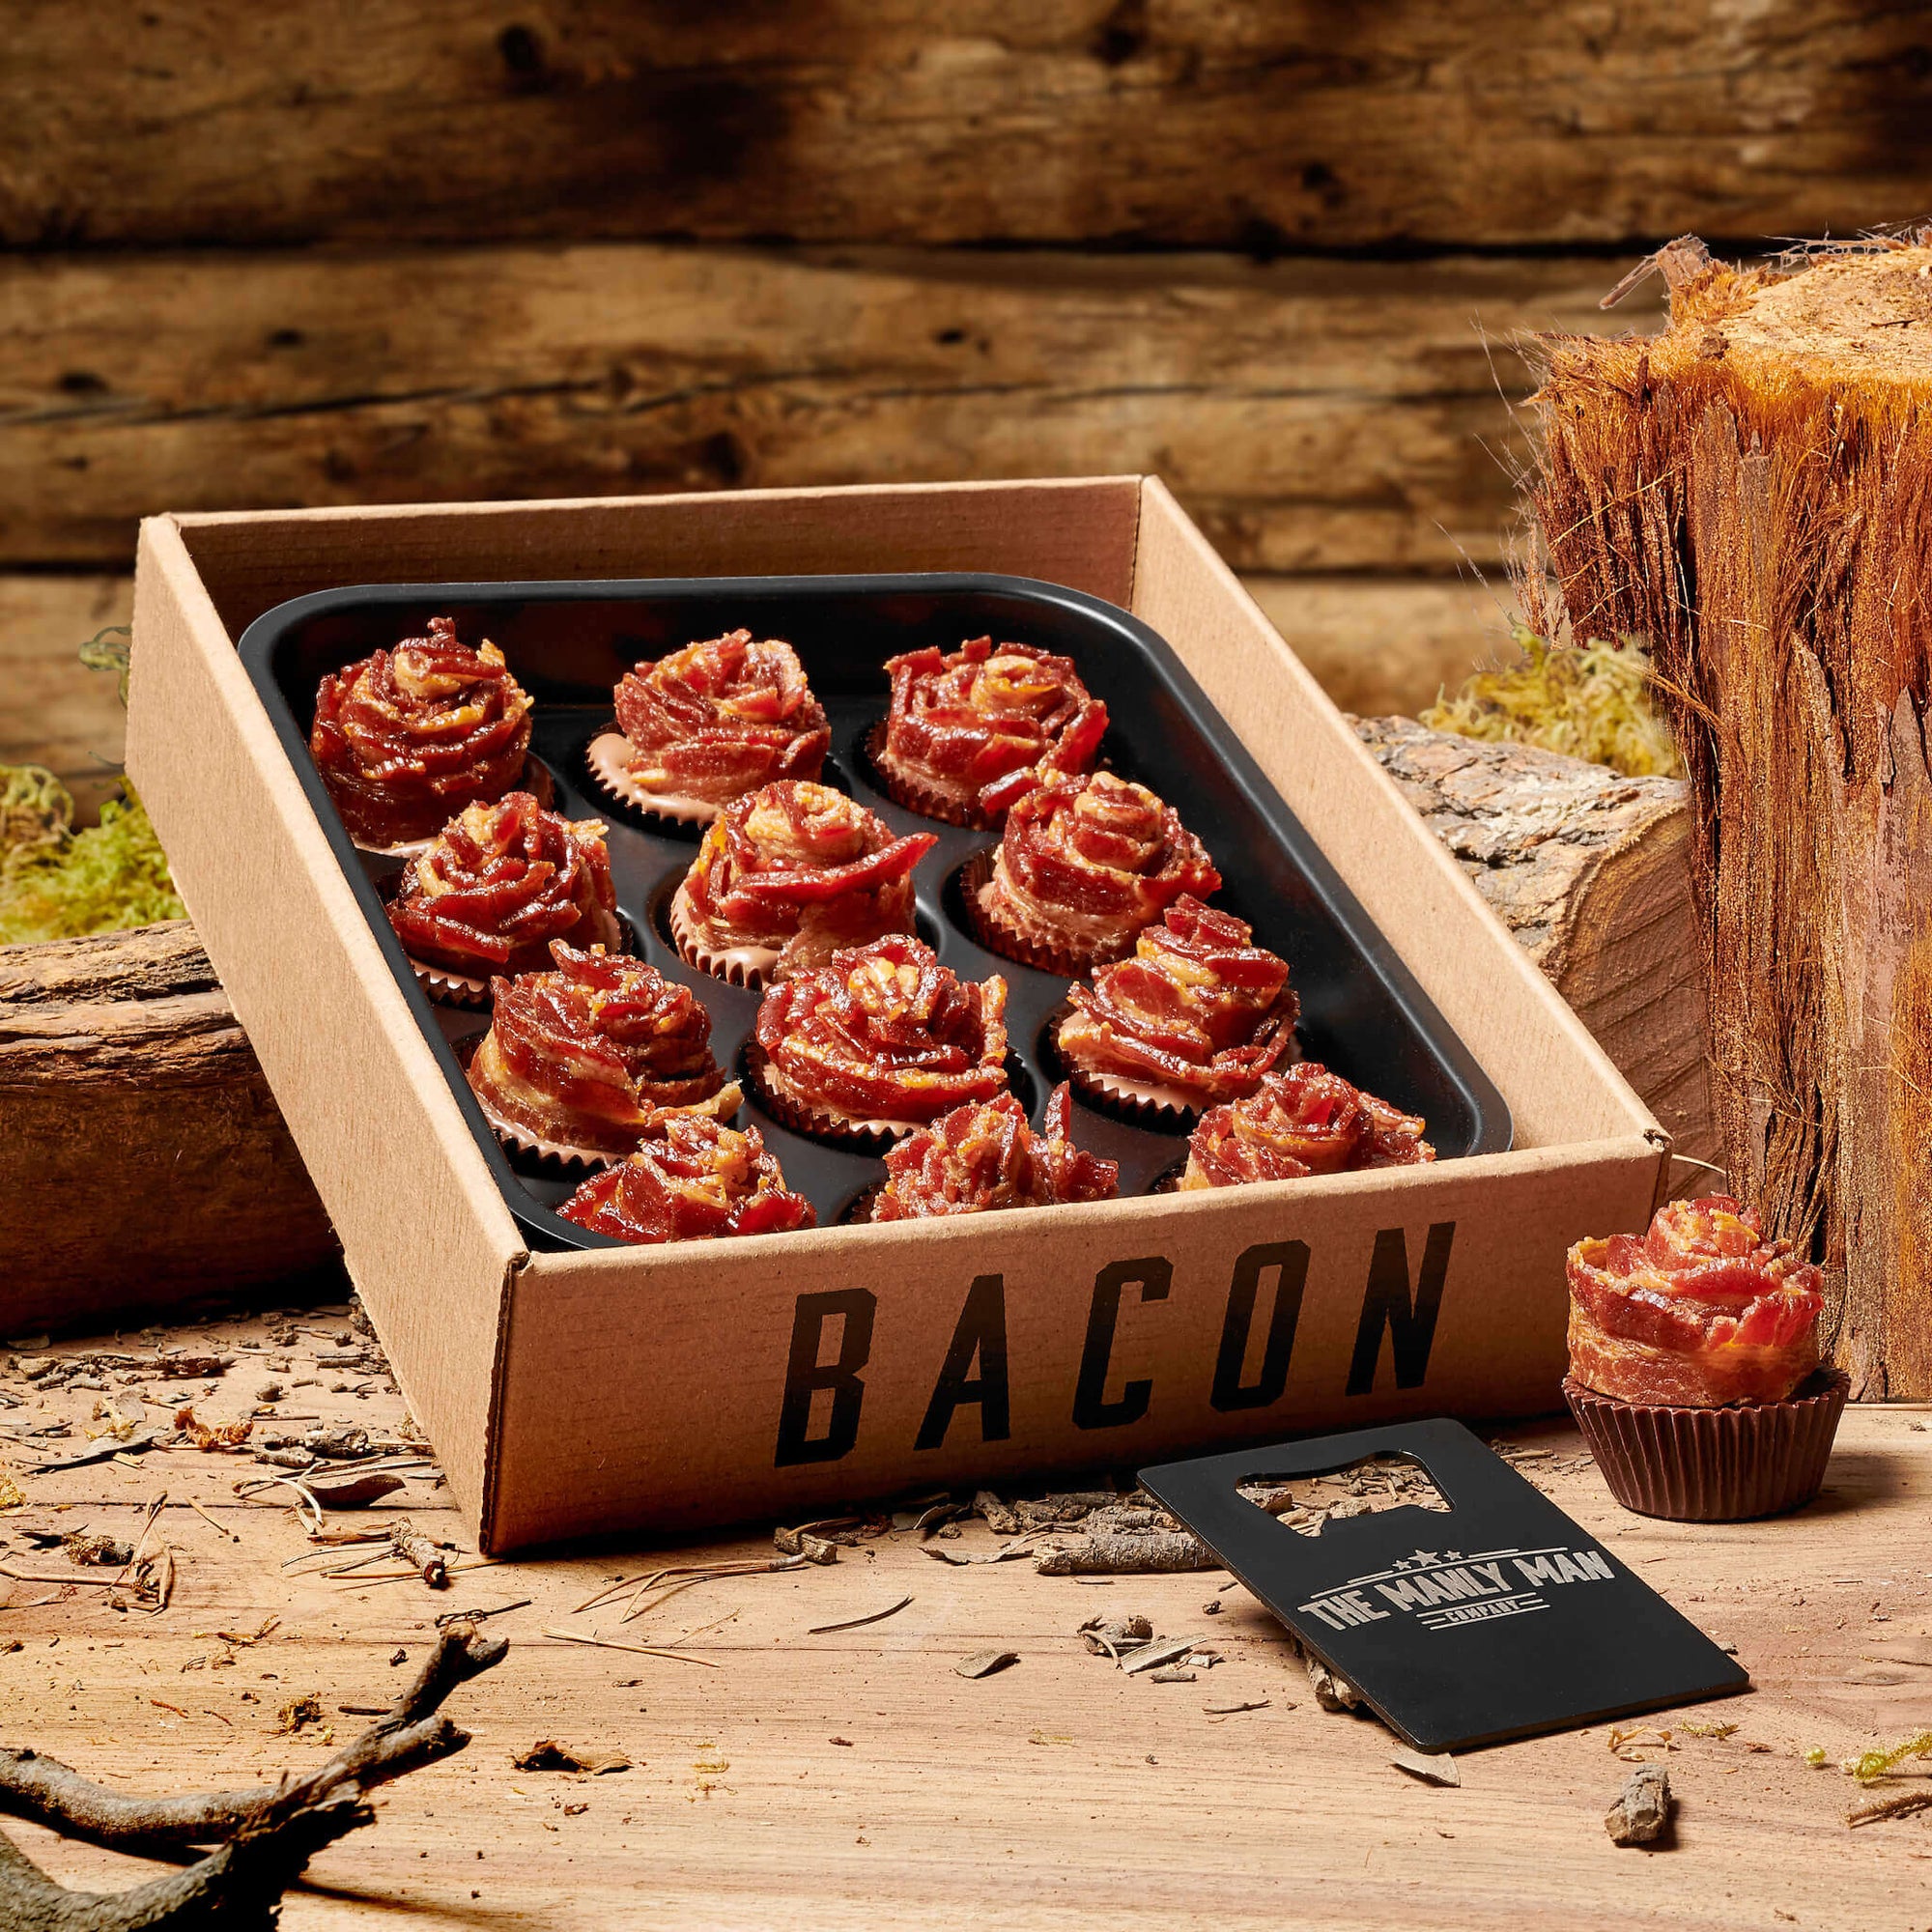 Bacon rose bouquet and Man Card bottle opener on outdoors background